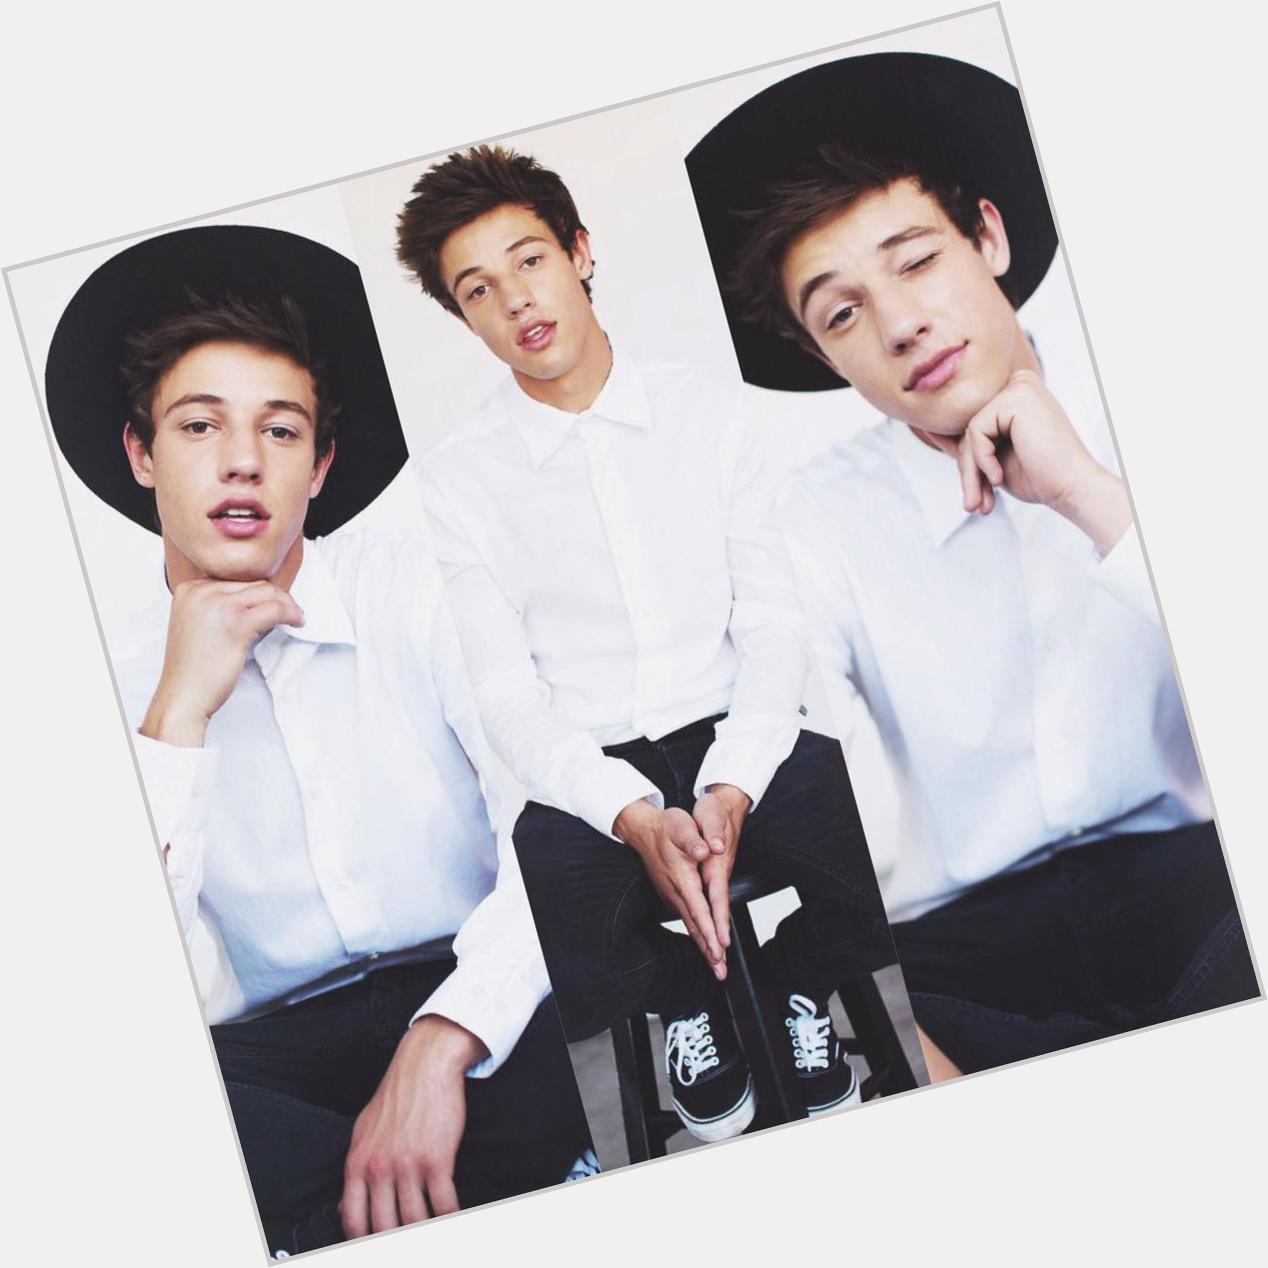 Happy Birthday to this guy, my guy Cameron Dallas! I love you, you\re so cool, handsome and ahhhh!    